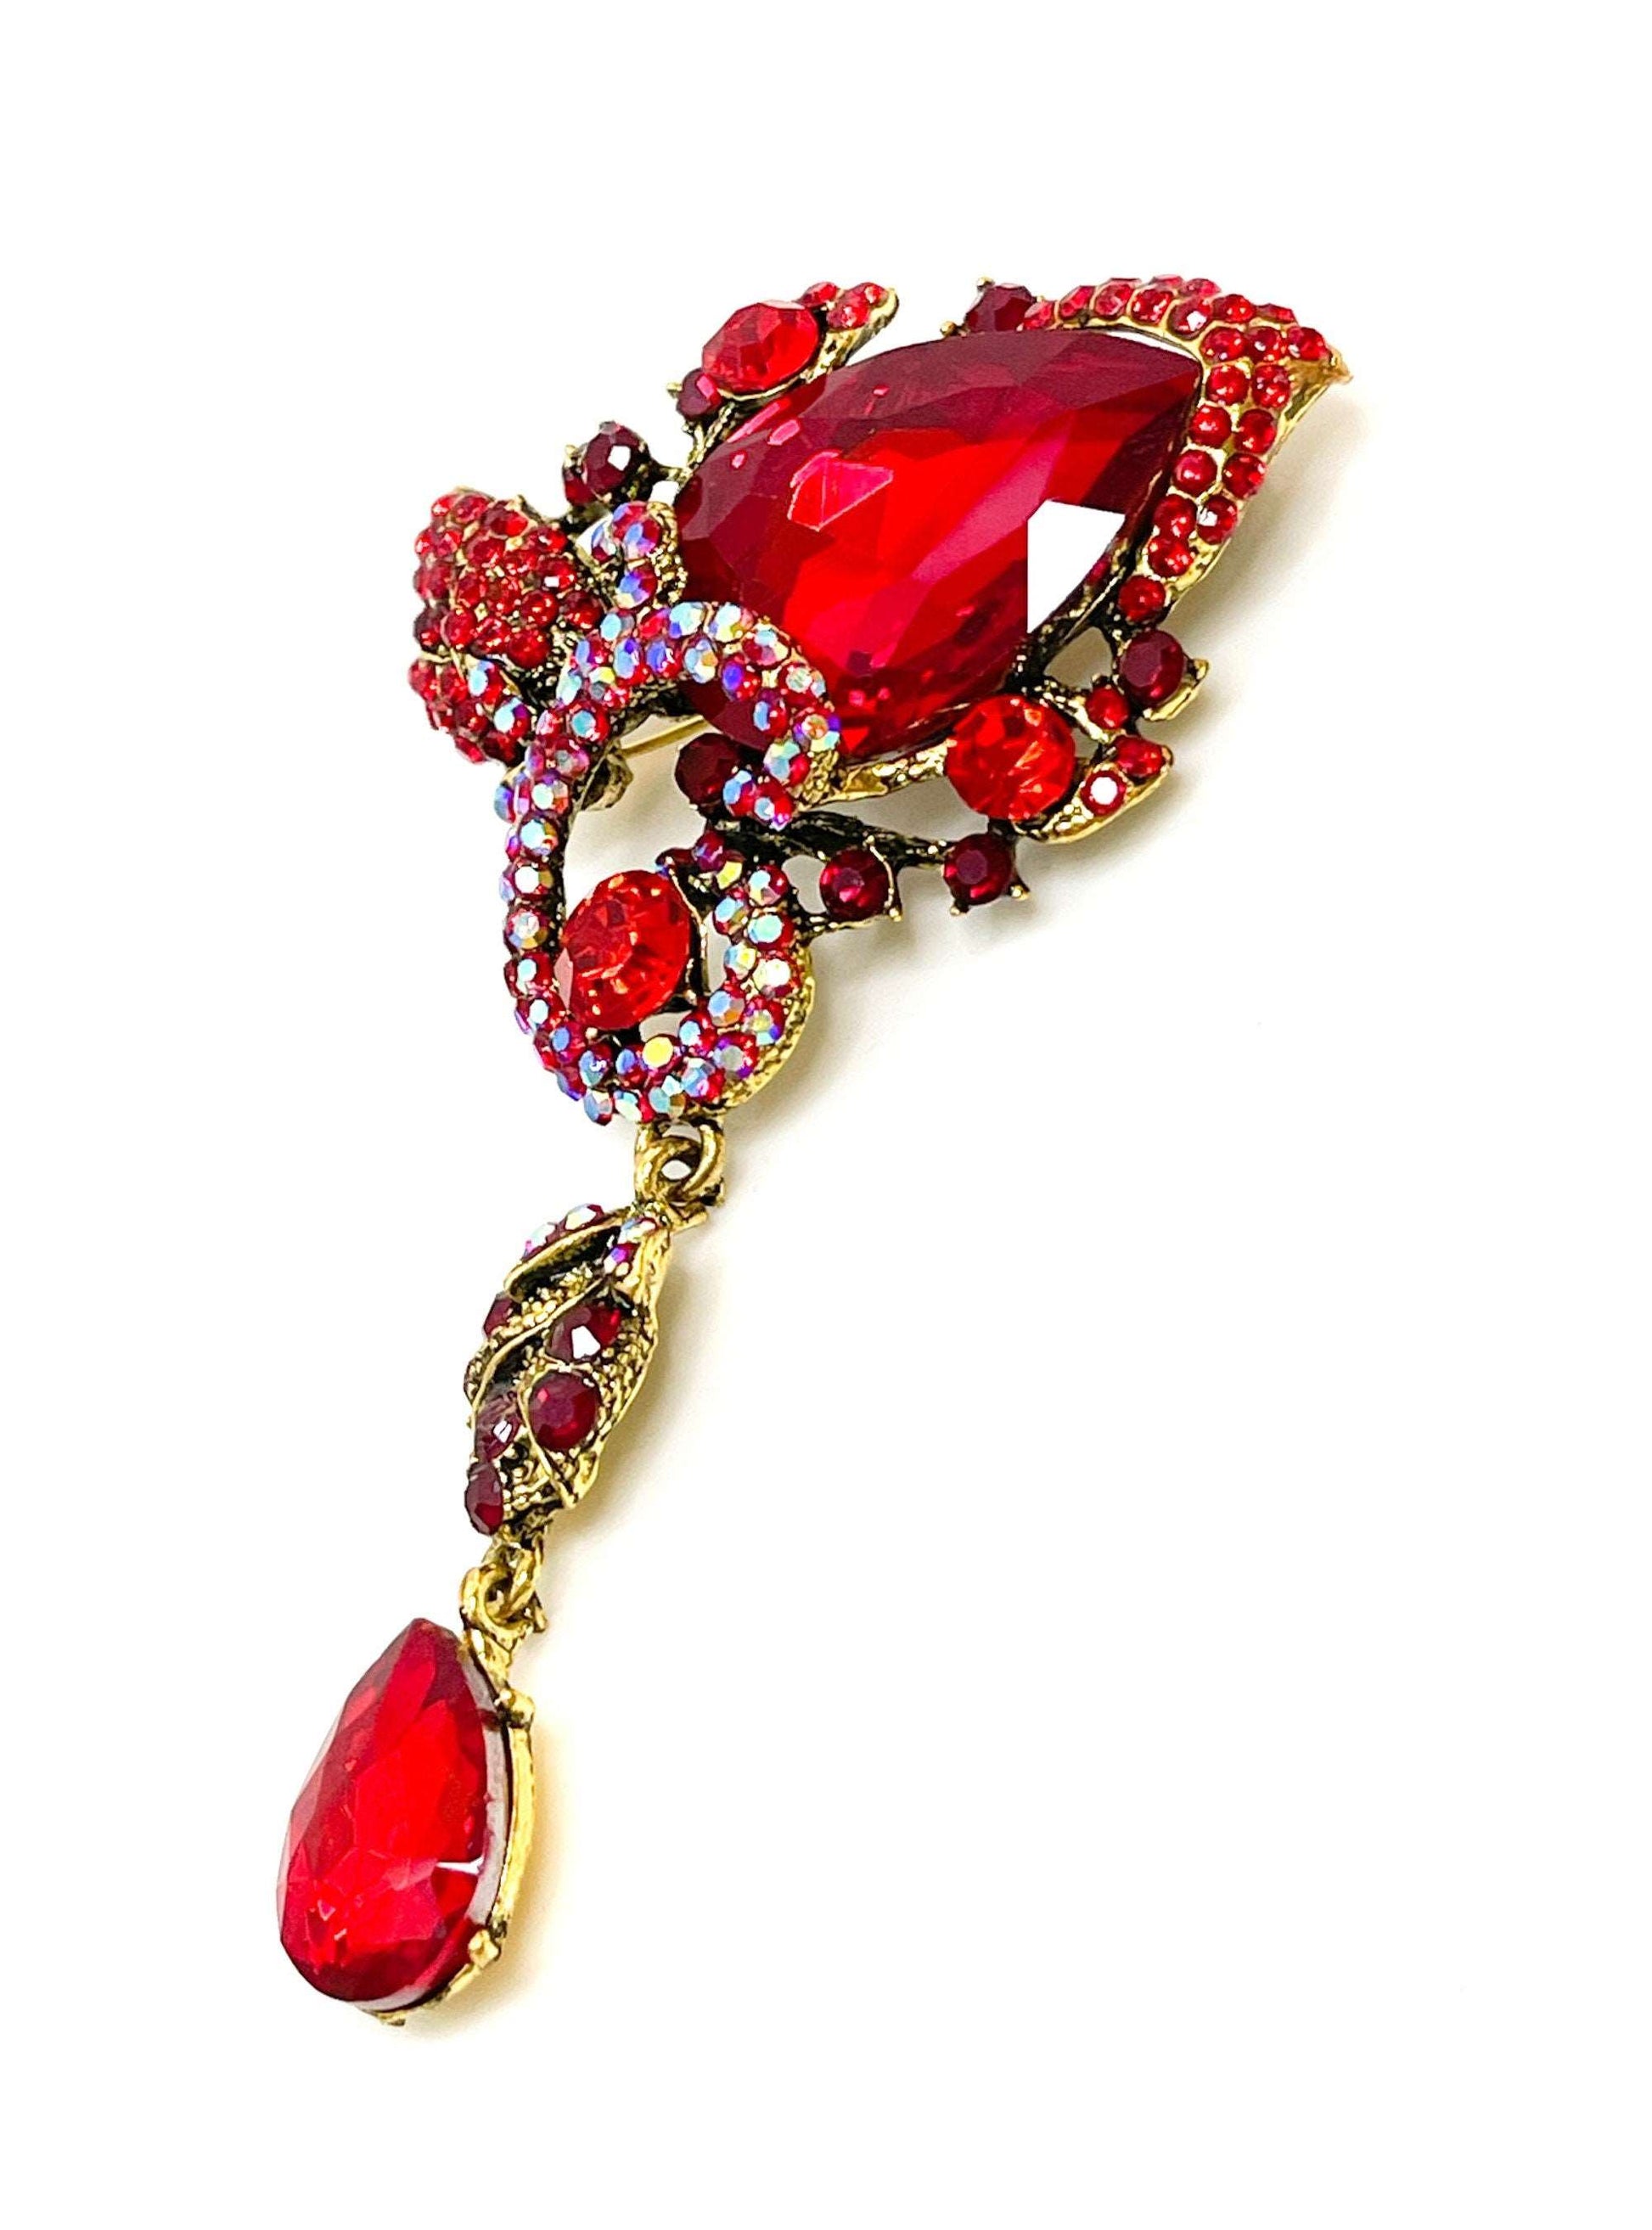 Extra Long Red Crystal Flower Brooch | Sparkly Red Crystal Water Drop Pin